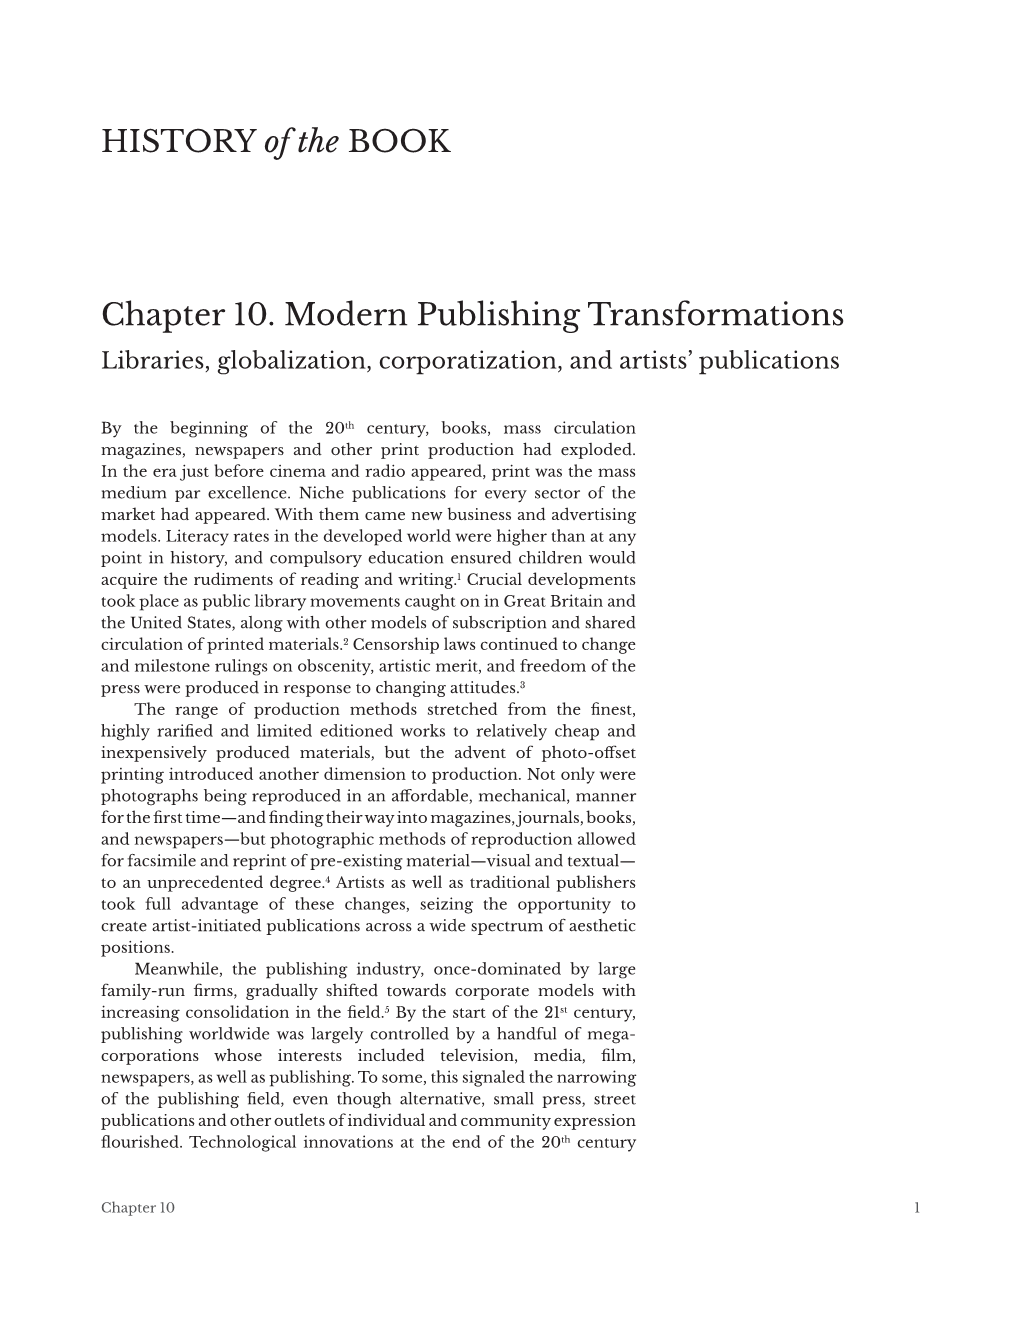 HISTORY of the BOOK Chapter 10. Modern Publishing Transformations